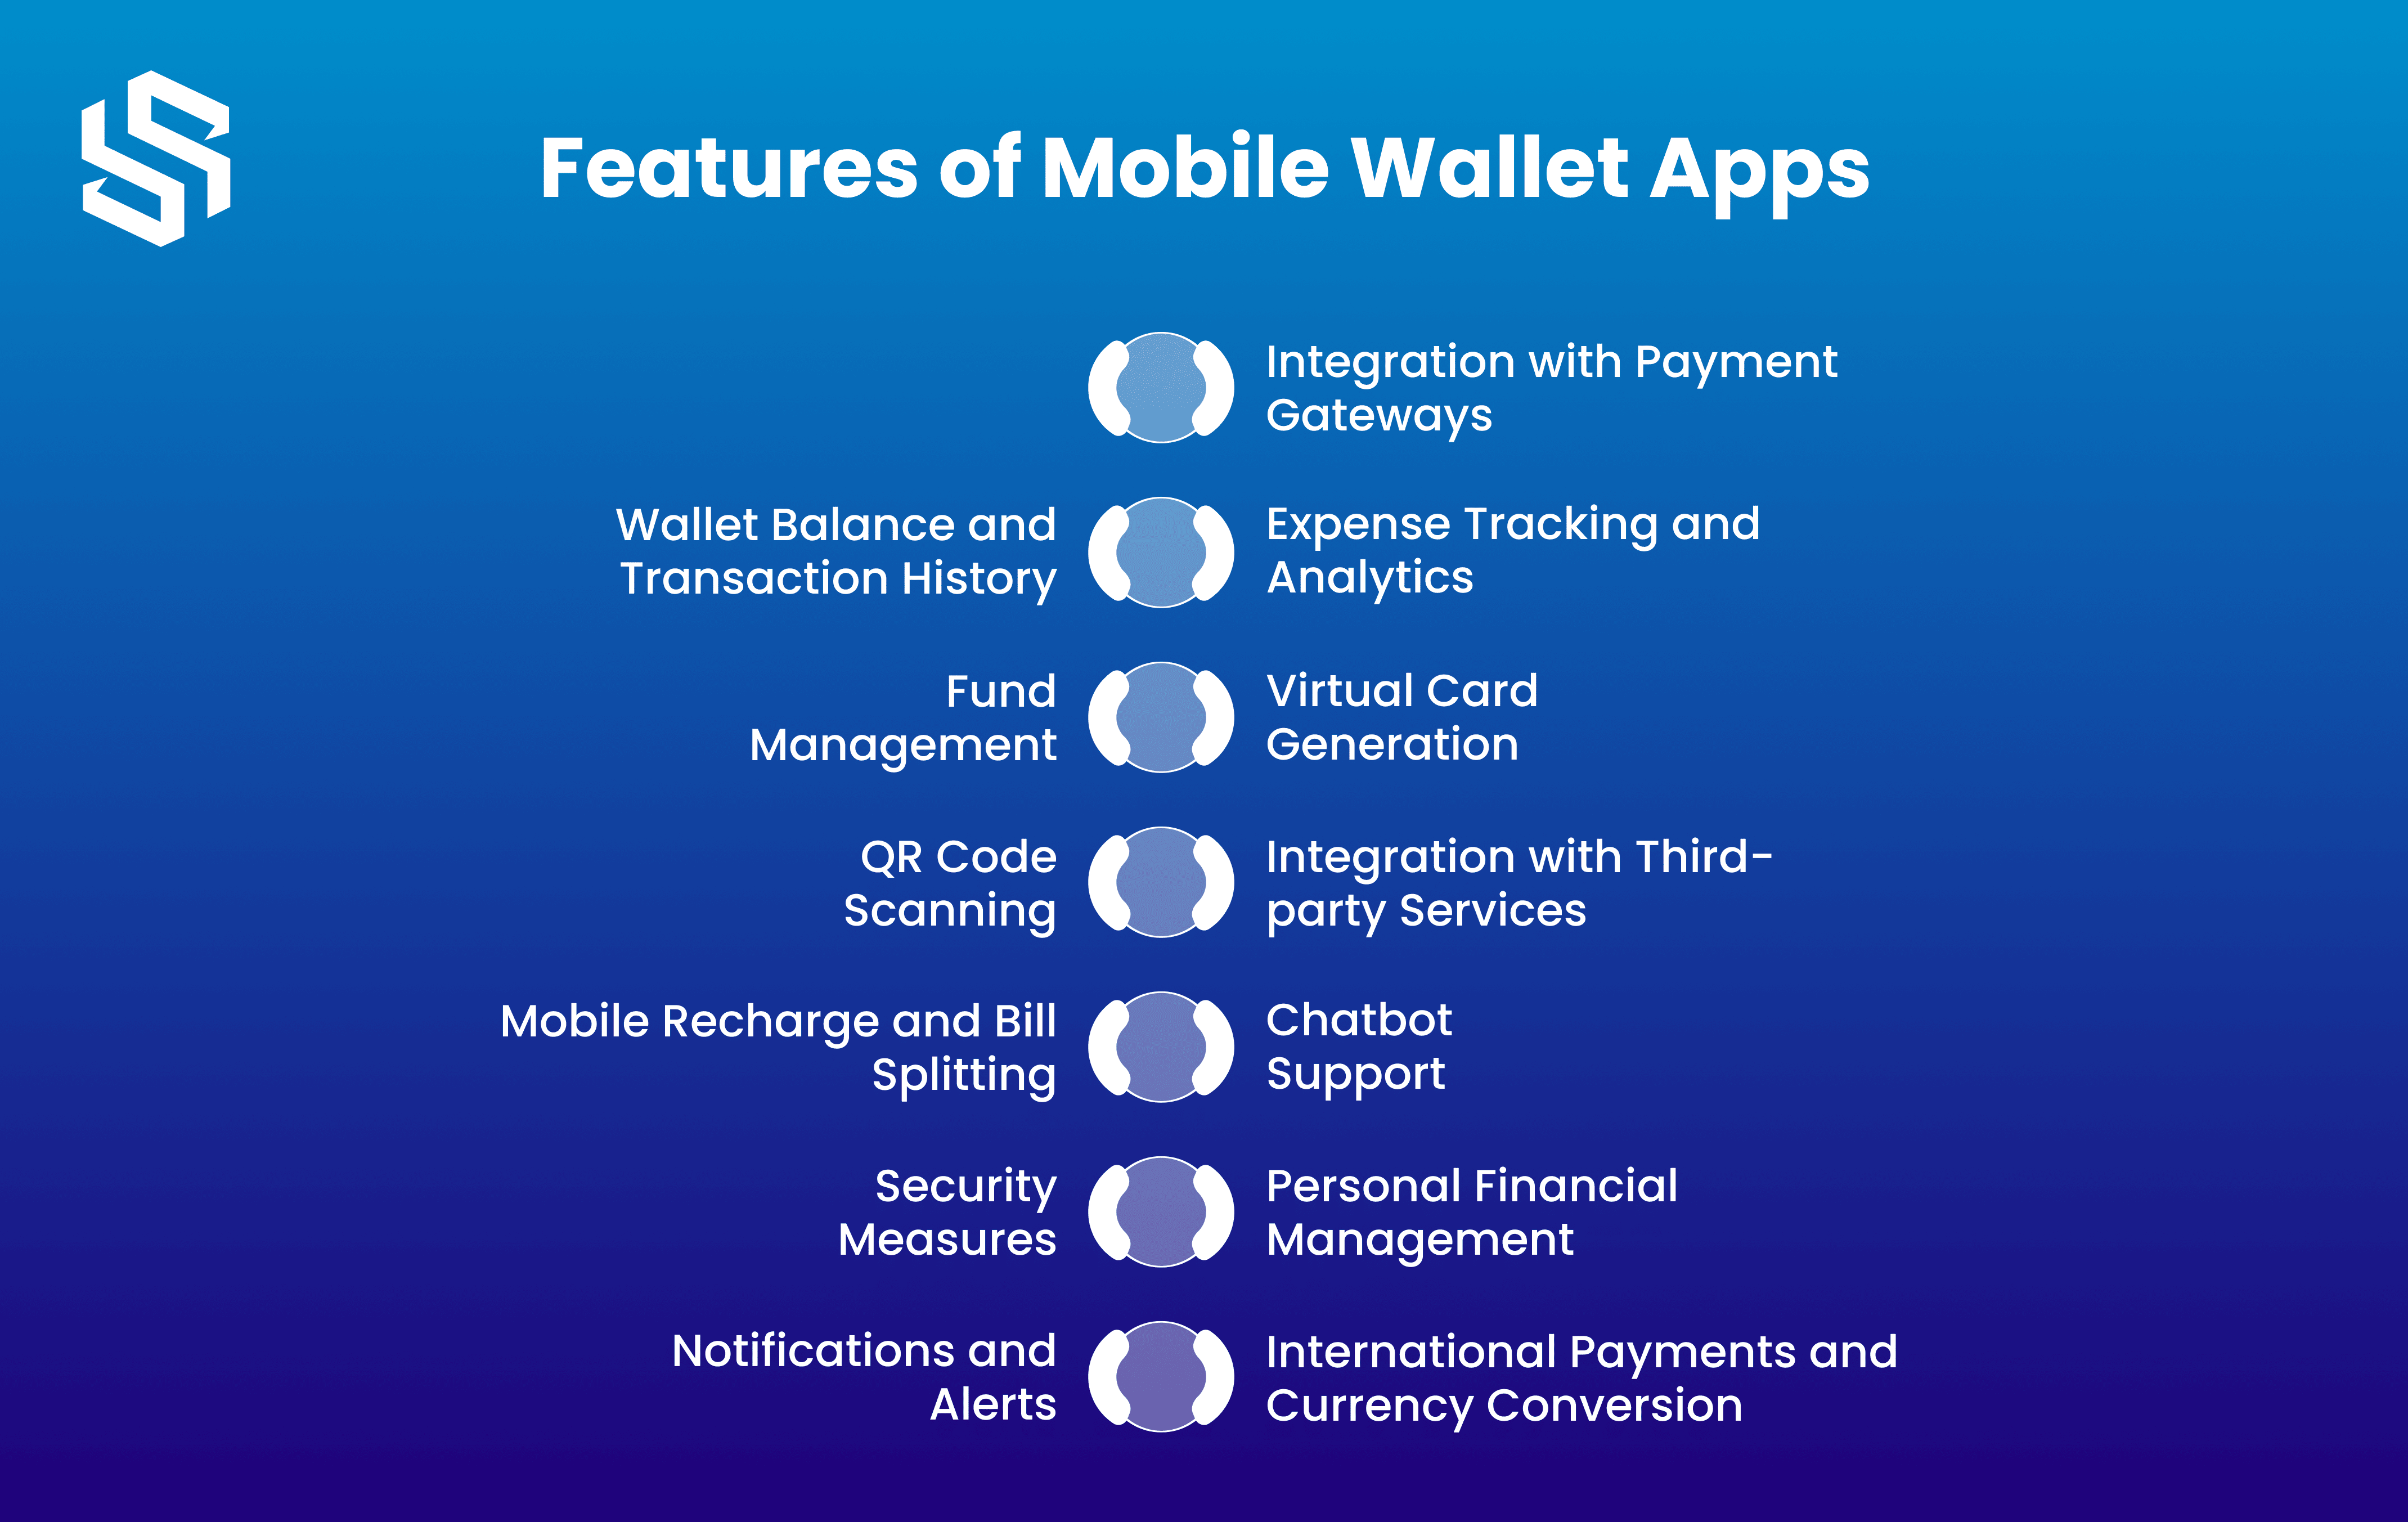 Features of Mobile Wallet Apps